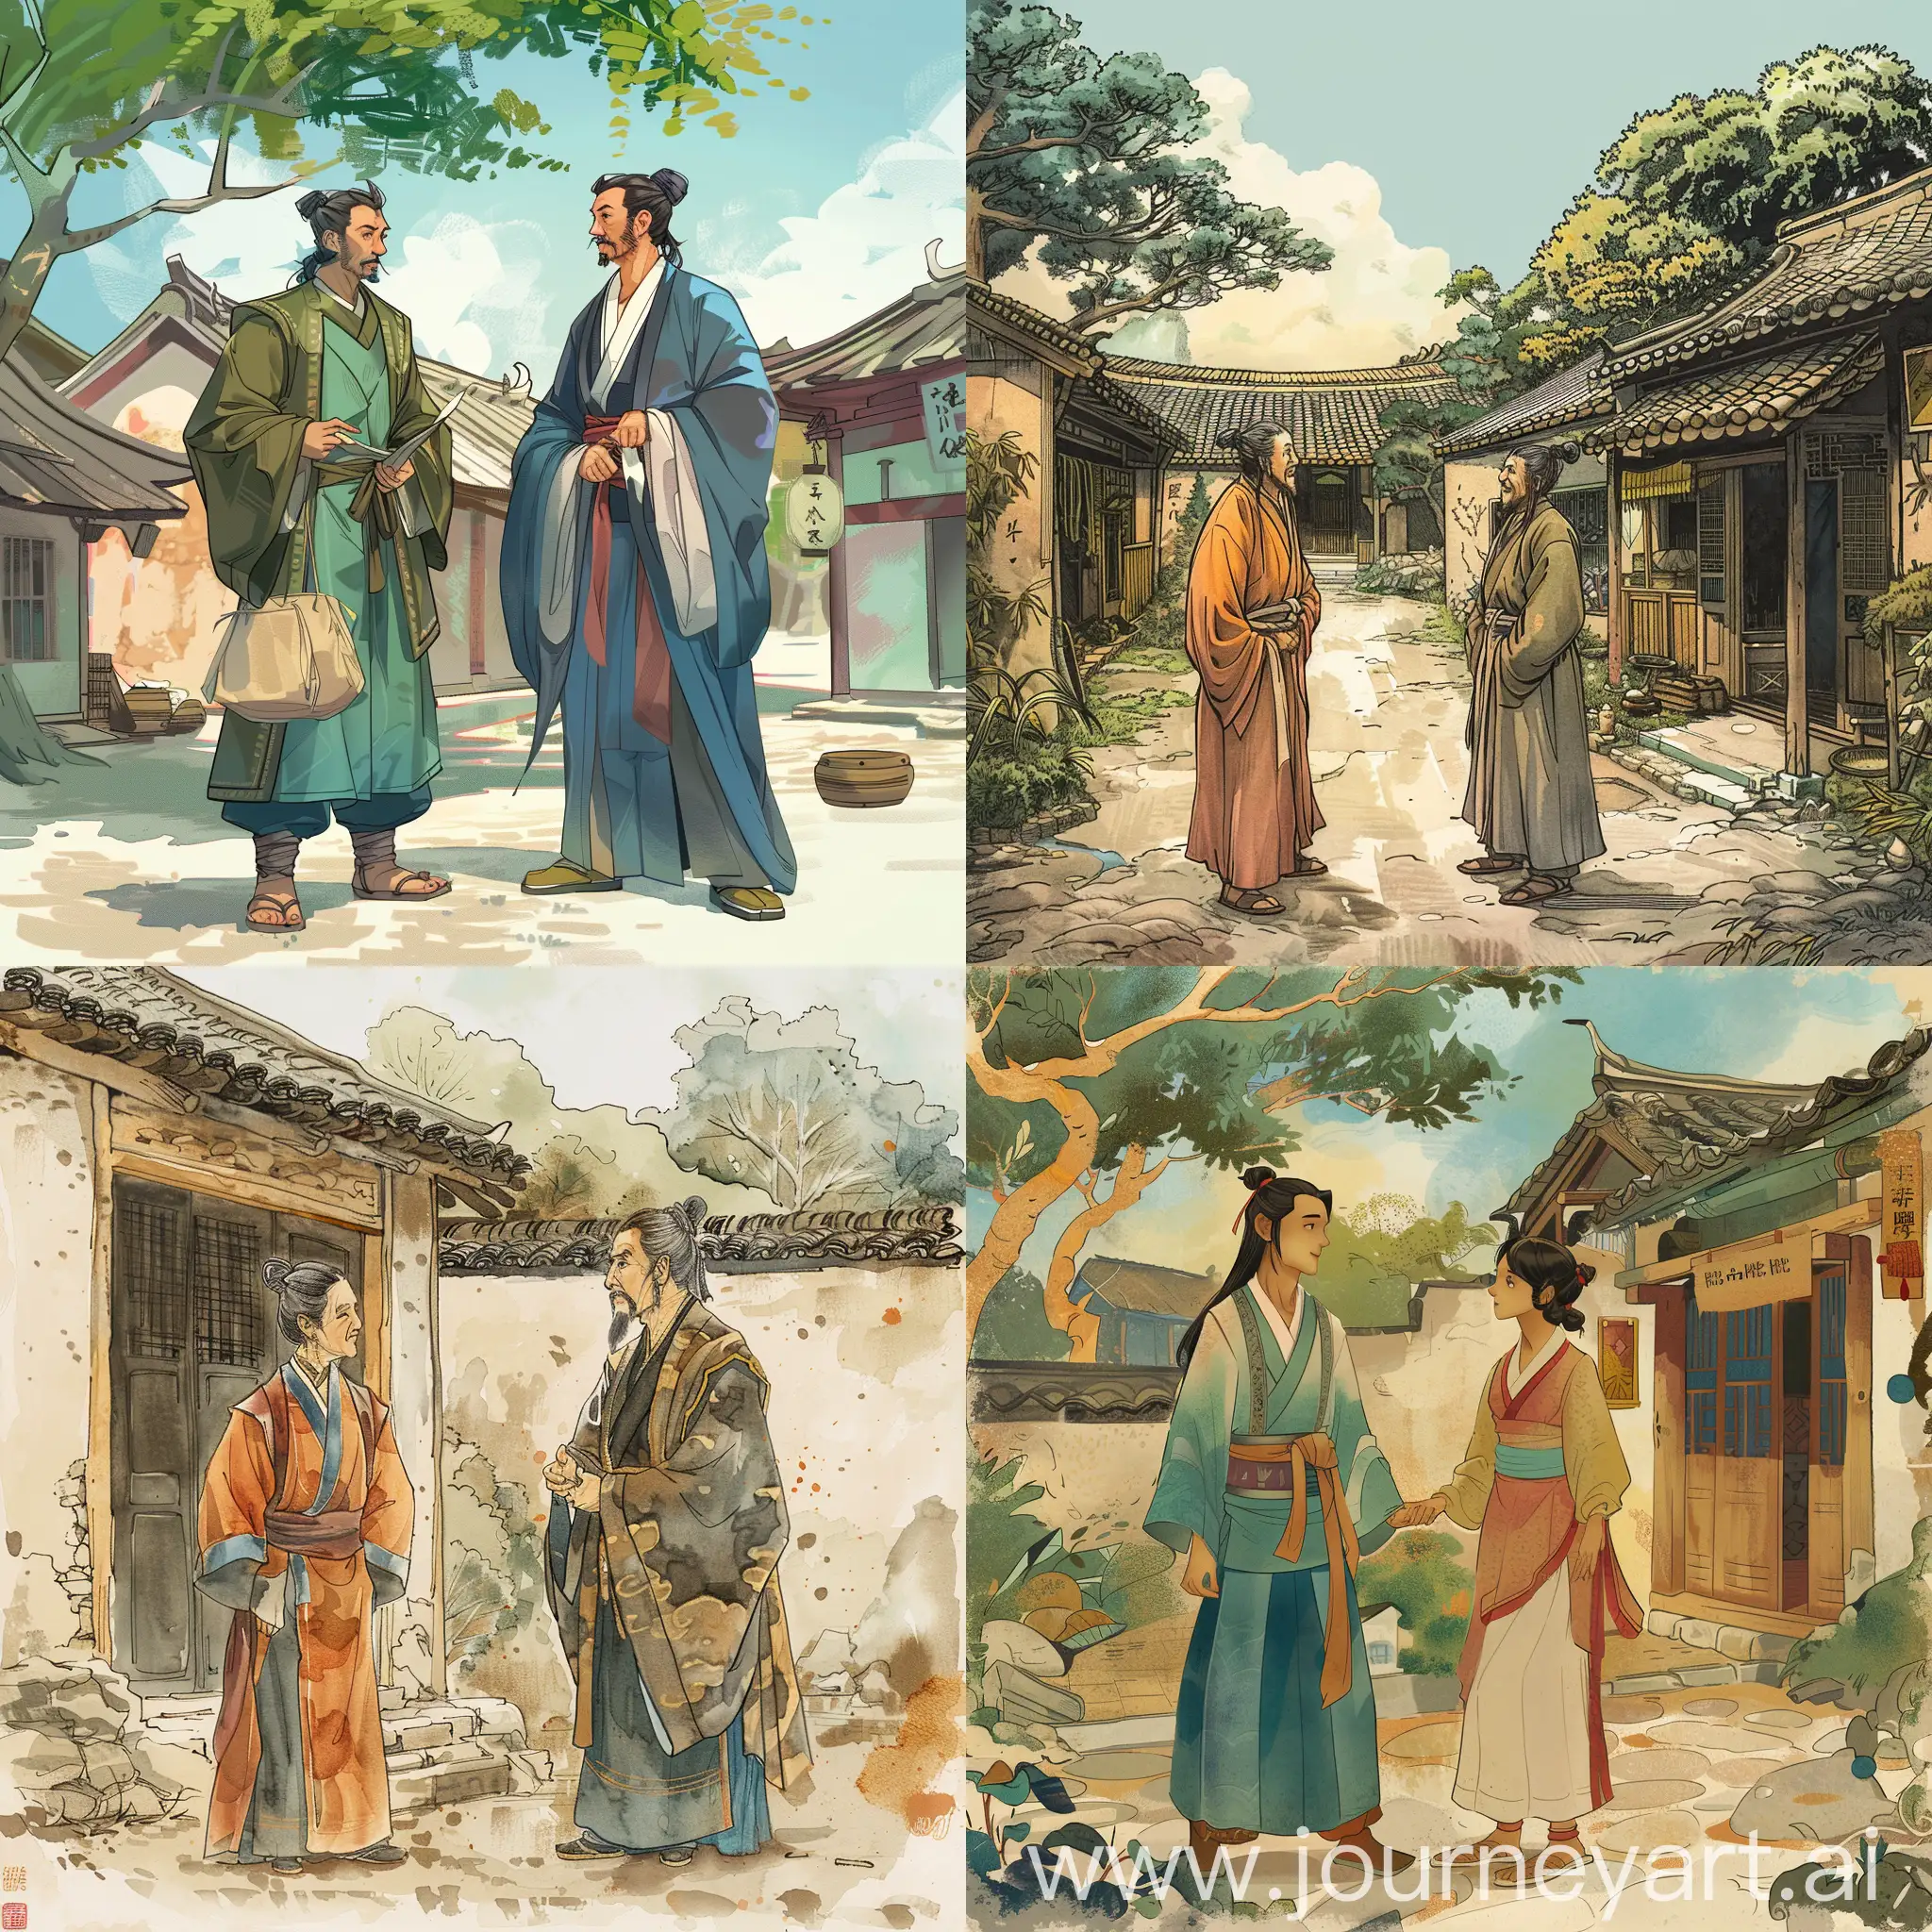 Contrasting-Neighbors-Aizi-and-Maokong-in-an-Ancient-Village